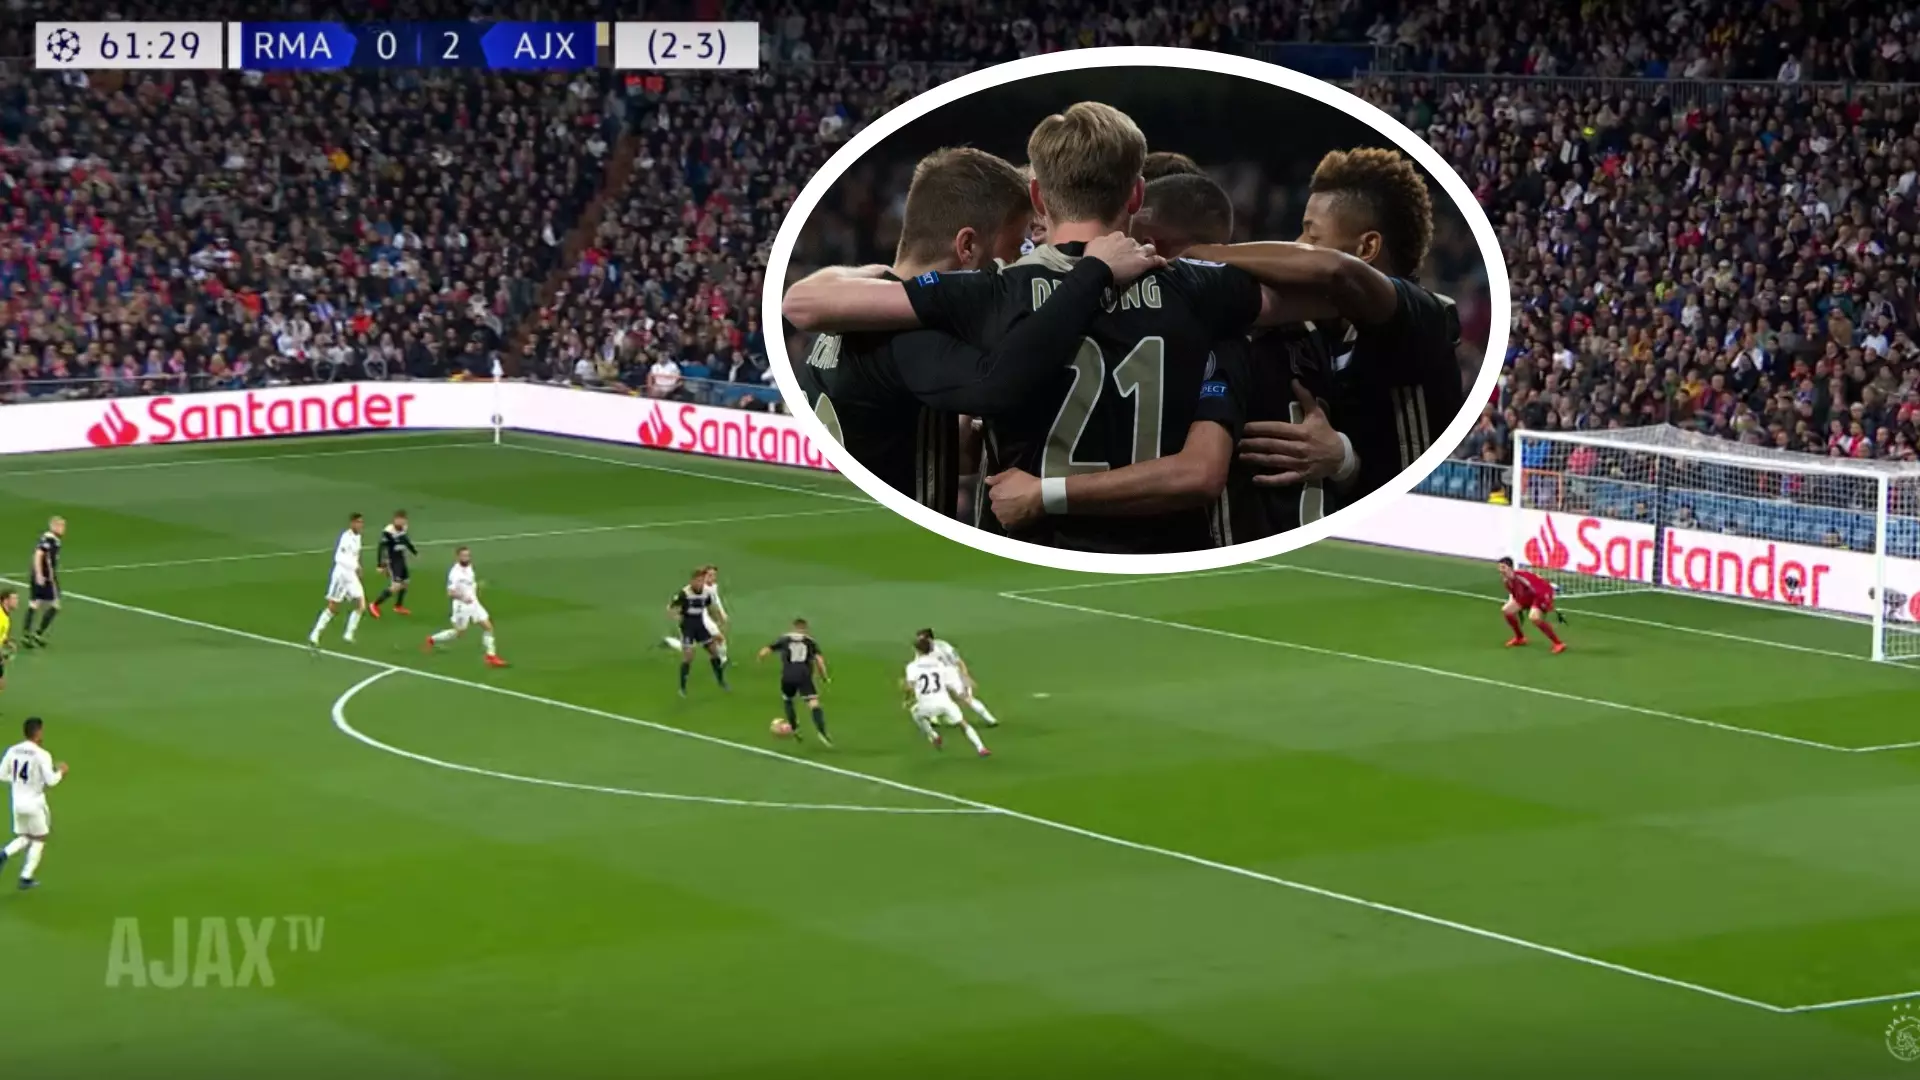 Ajax Release Compilation Video Featuring All 175 Goals Scored In Their Record-Breaking Season